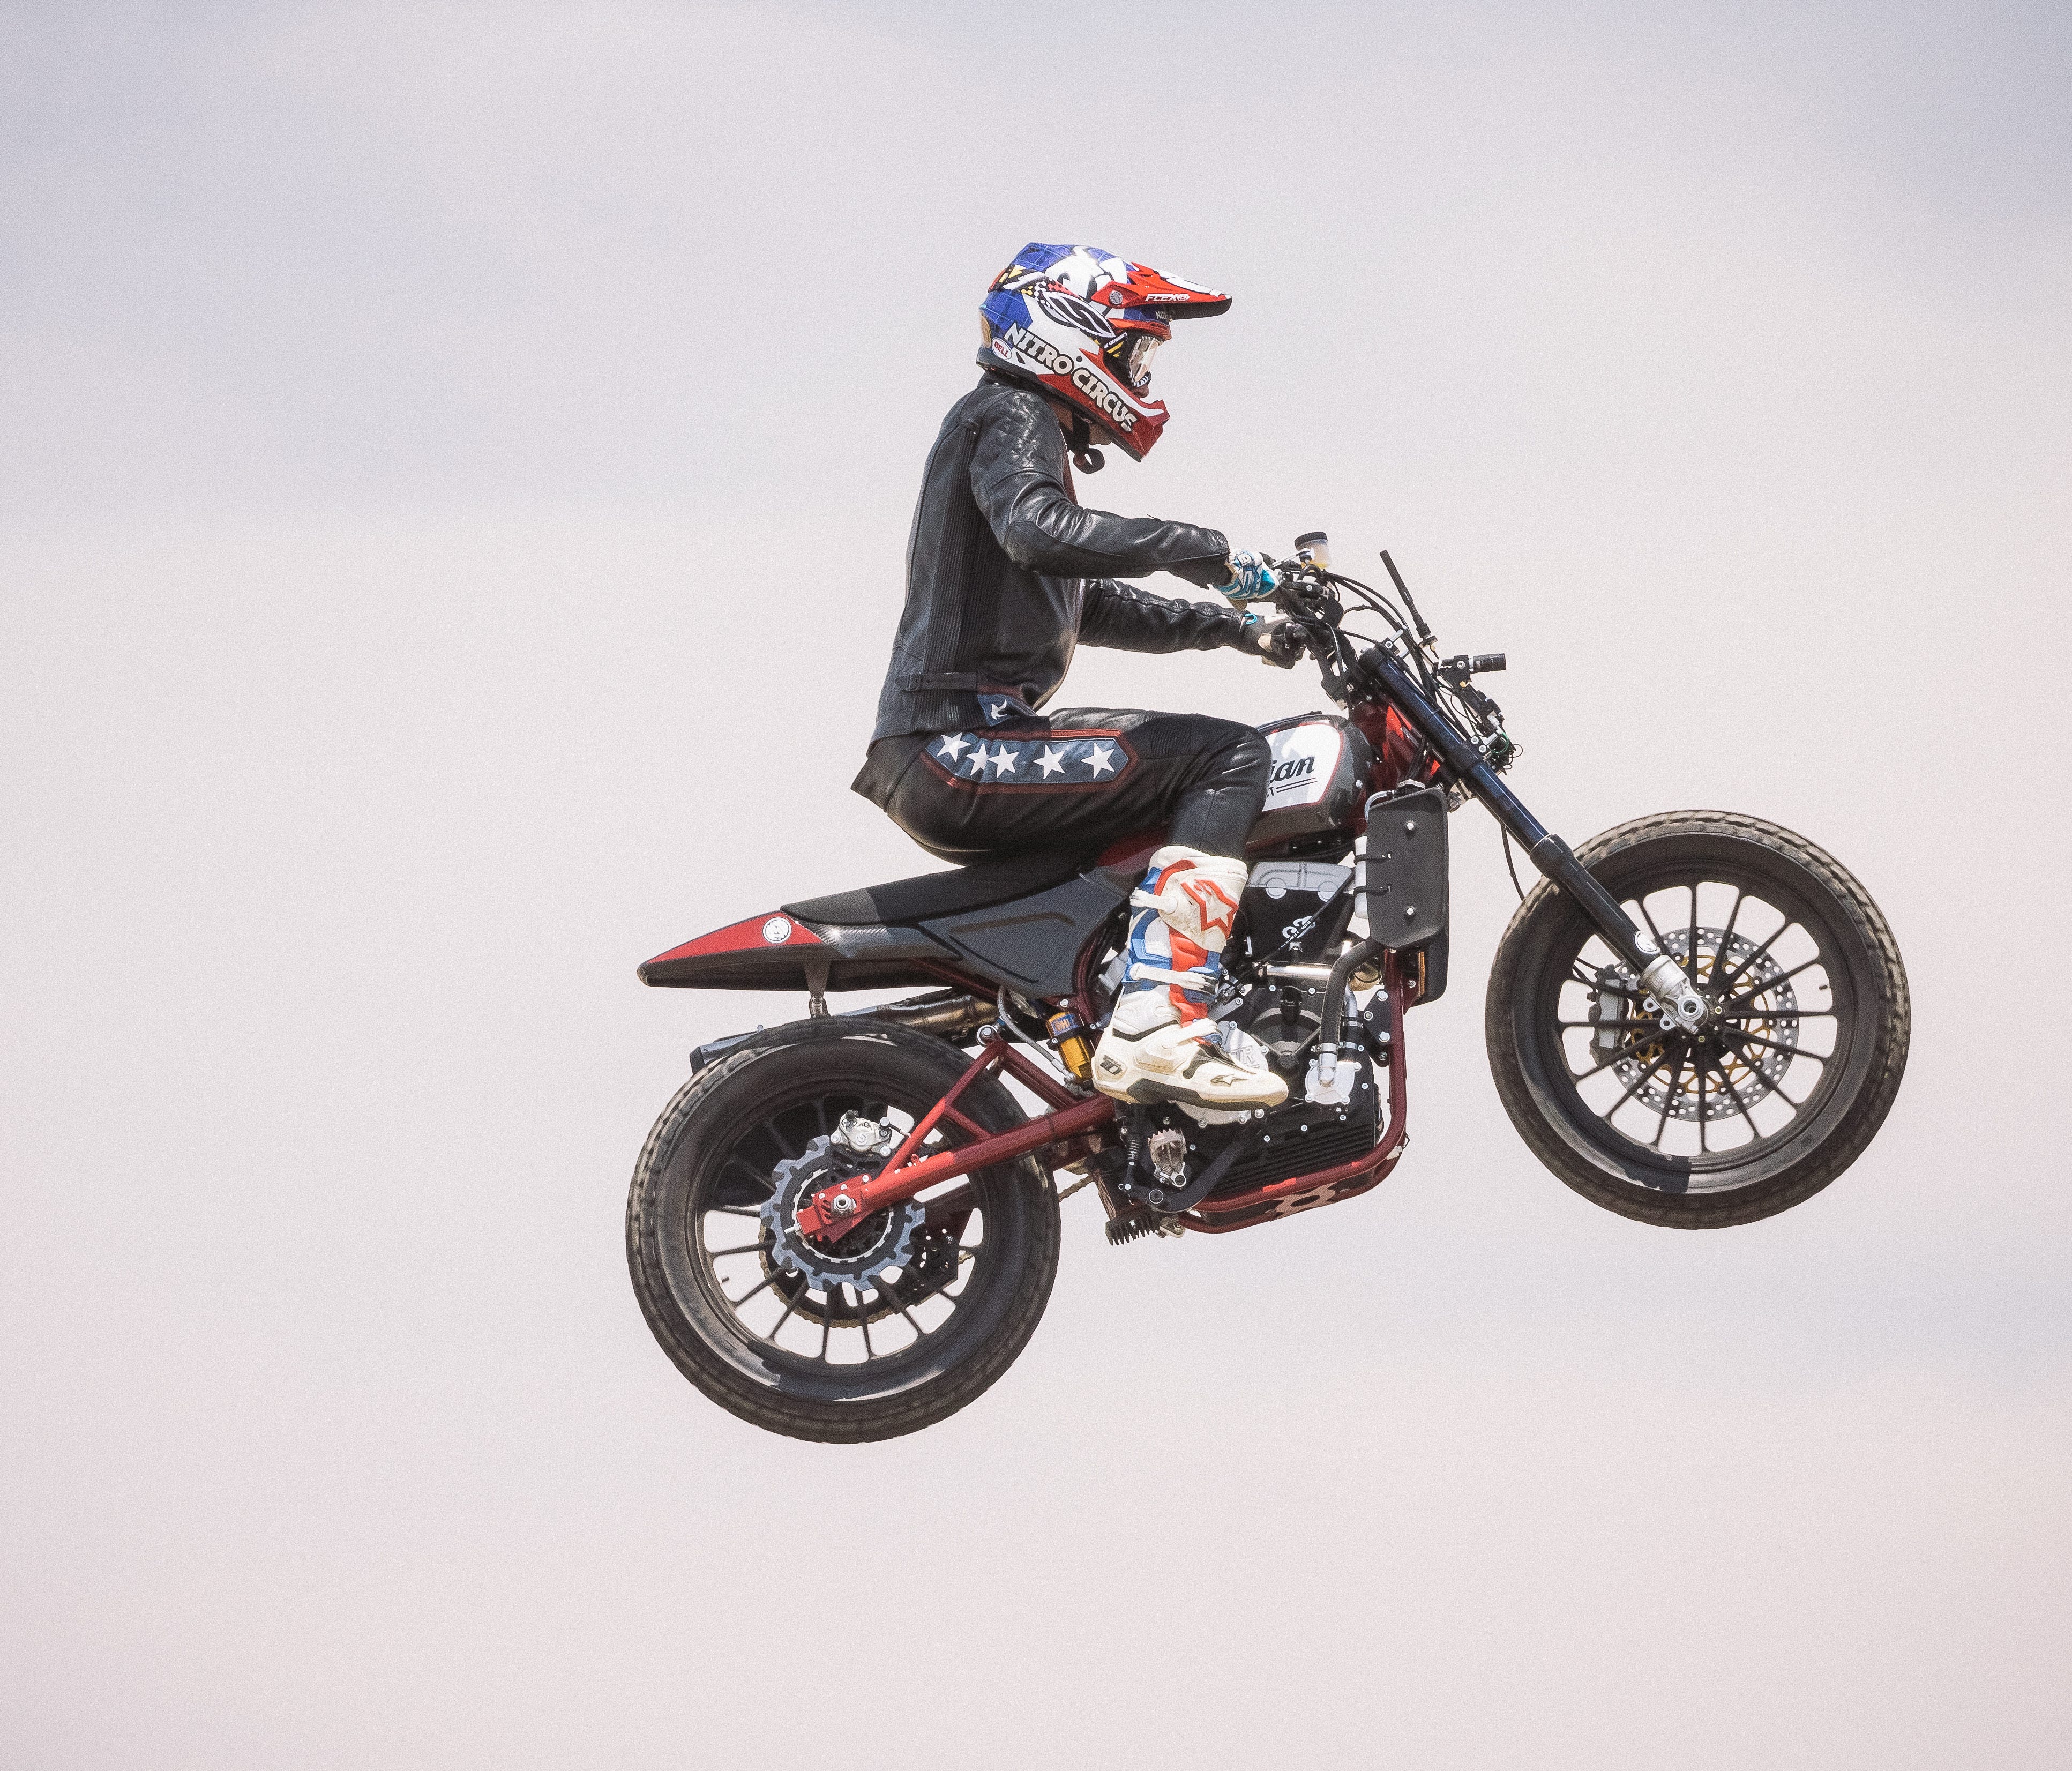 Travis Pastrana will attempt the stunts while riding a modern-day recreation inspired by the motorcycle Knievel used.